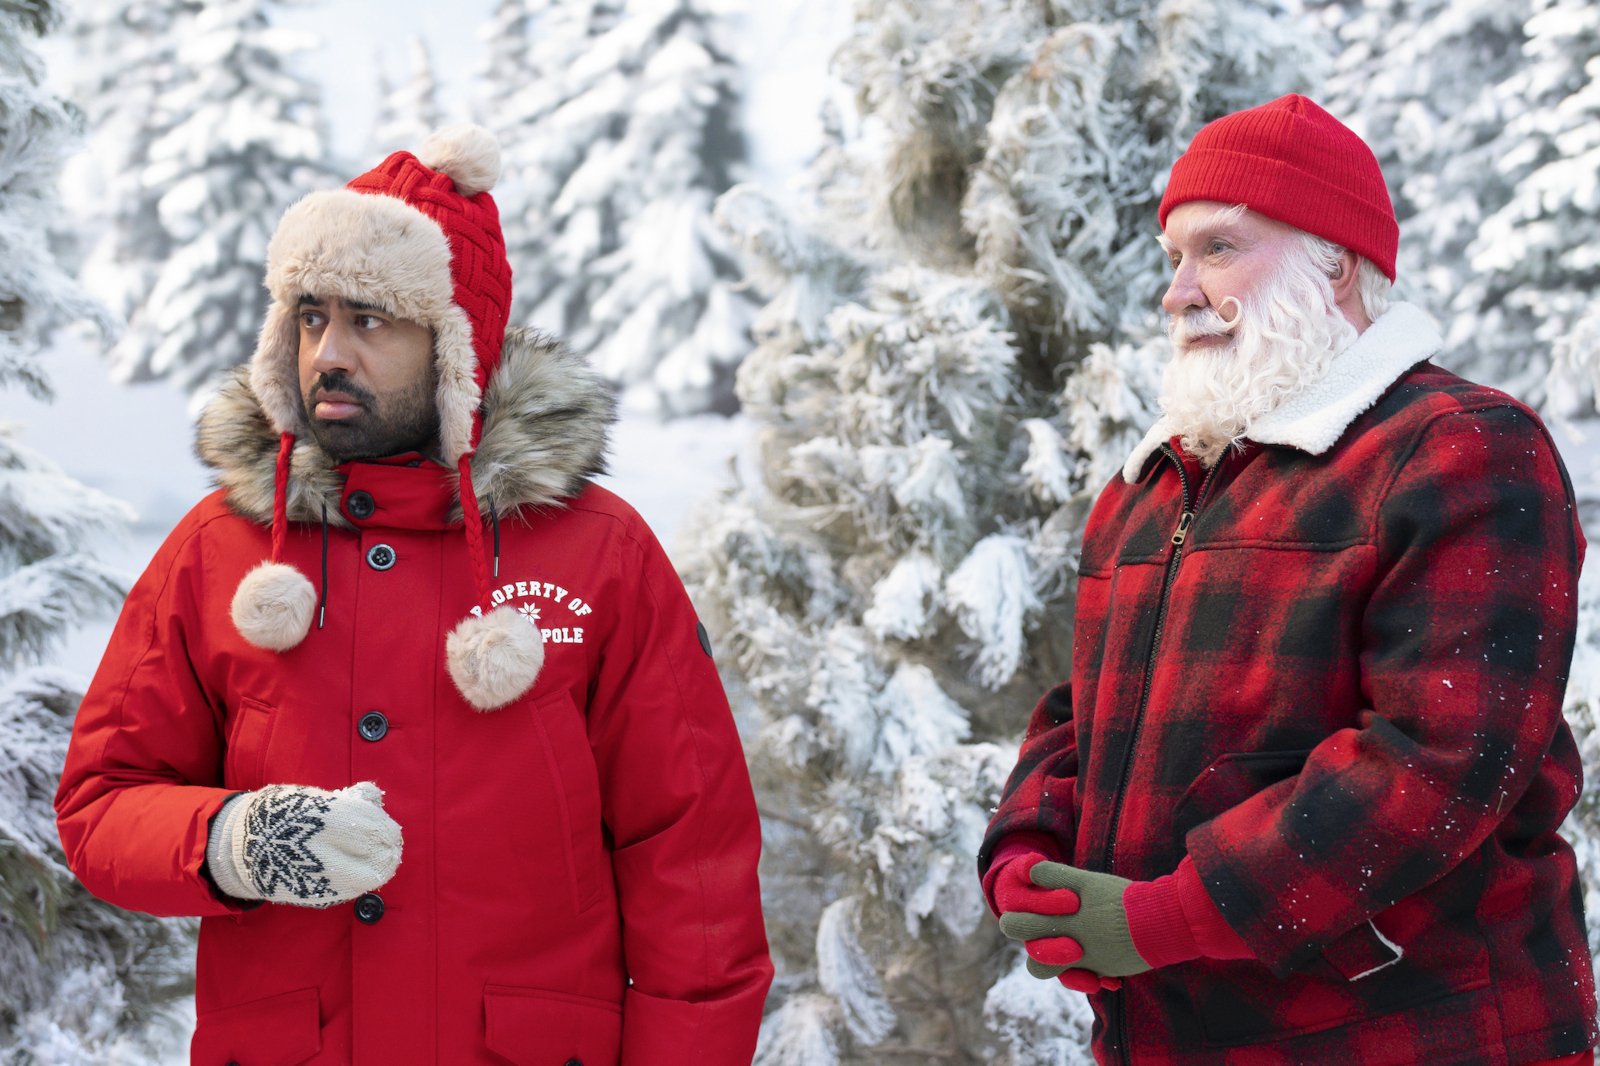 Kal Penn and Tim Allen in 'The Santa Clauses' for our article about episode 4. They're both wearing red coats and standing in the snowy woods.